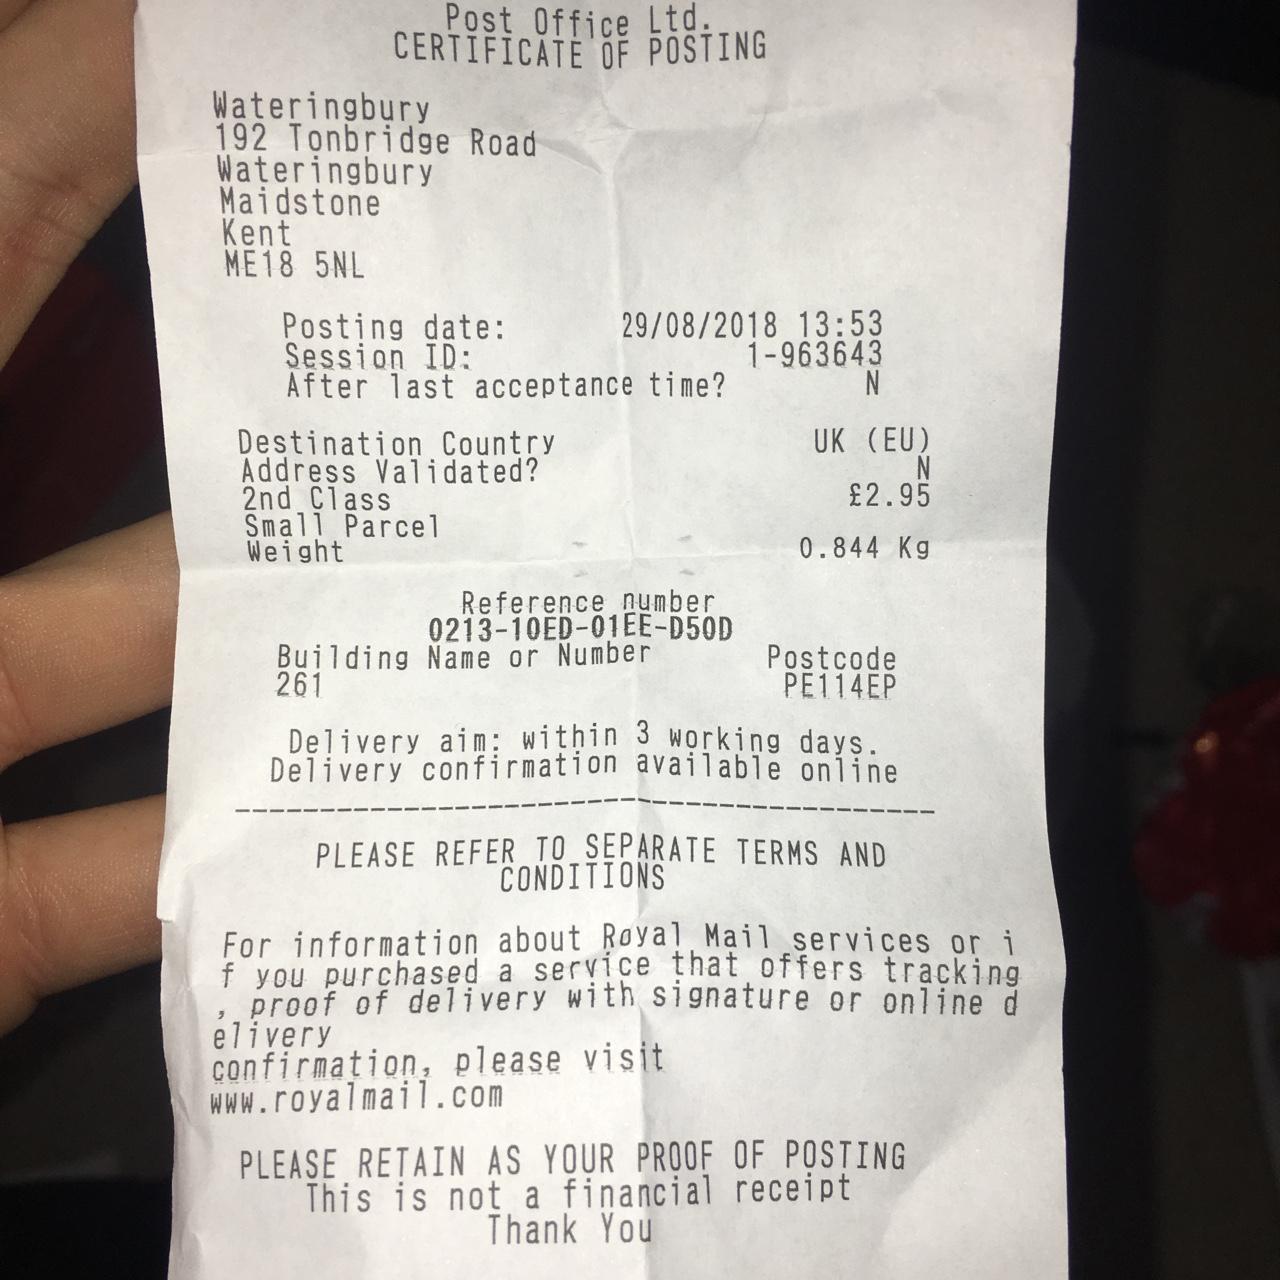 mitch9417 there's my receipt mate - Depop